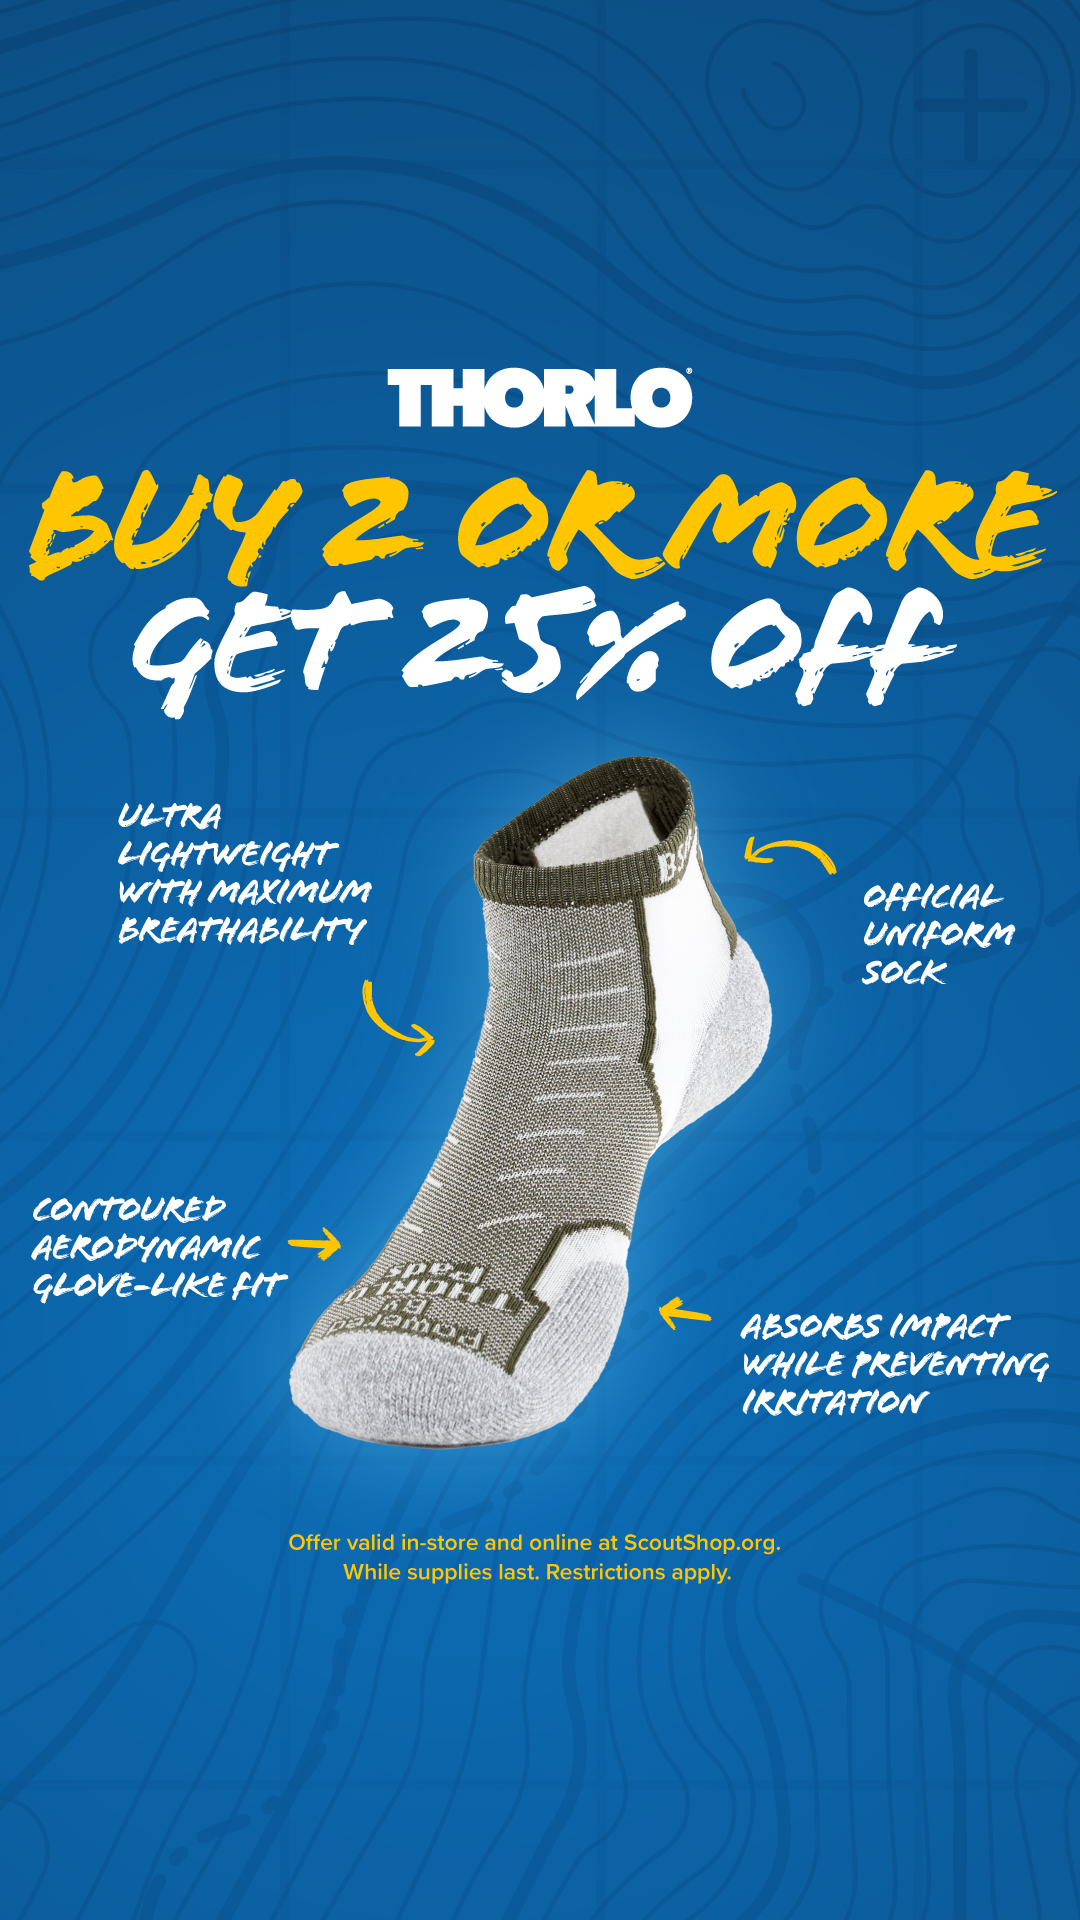 Buy 2 or more pairs of Thorlo socks and get 25% off